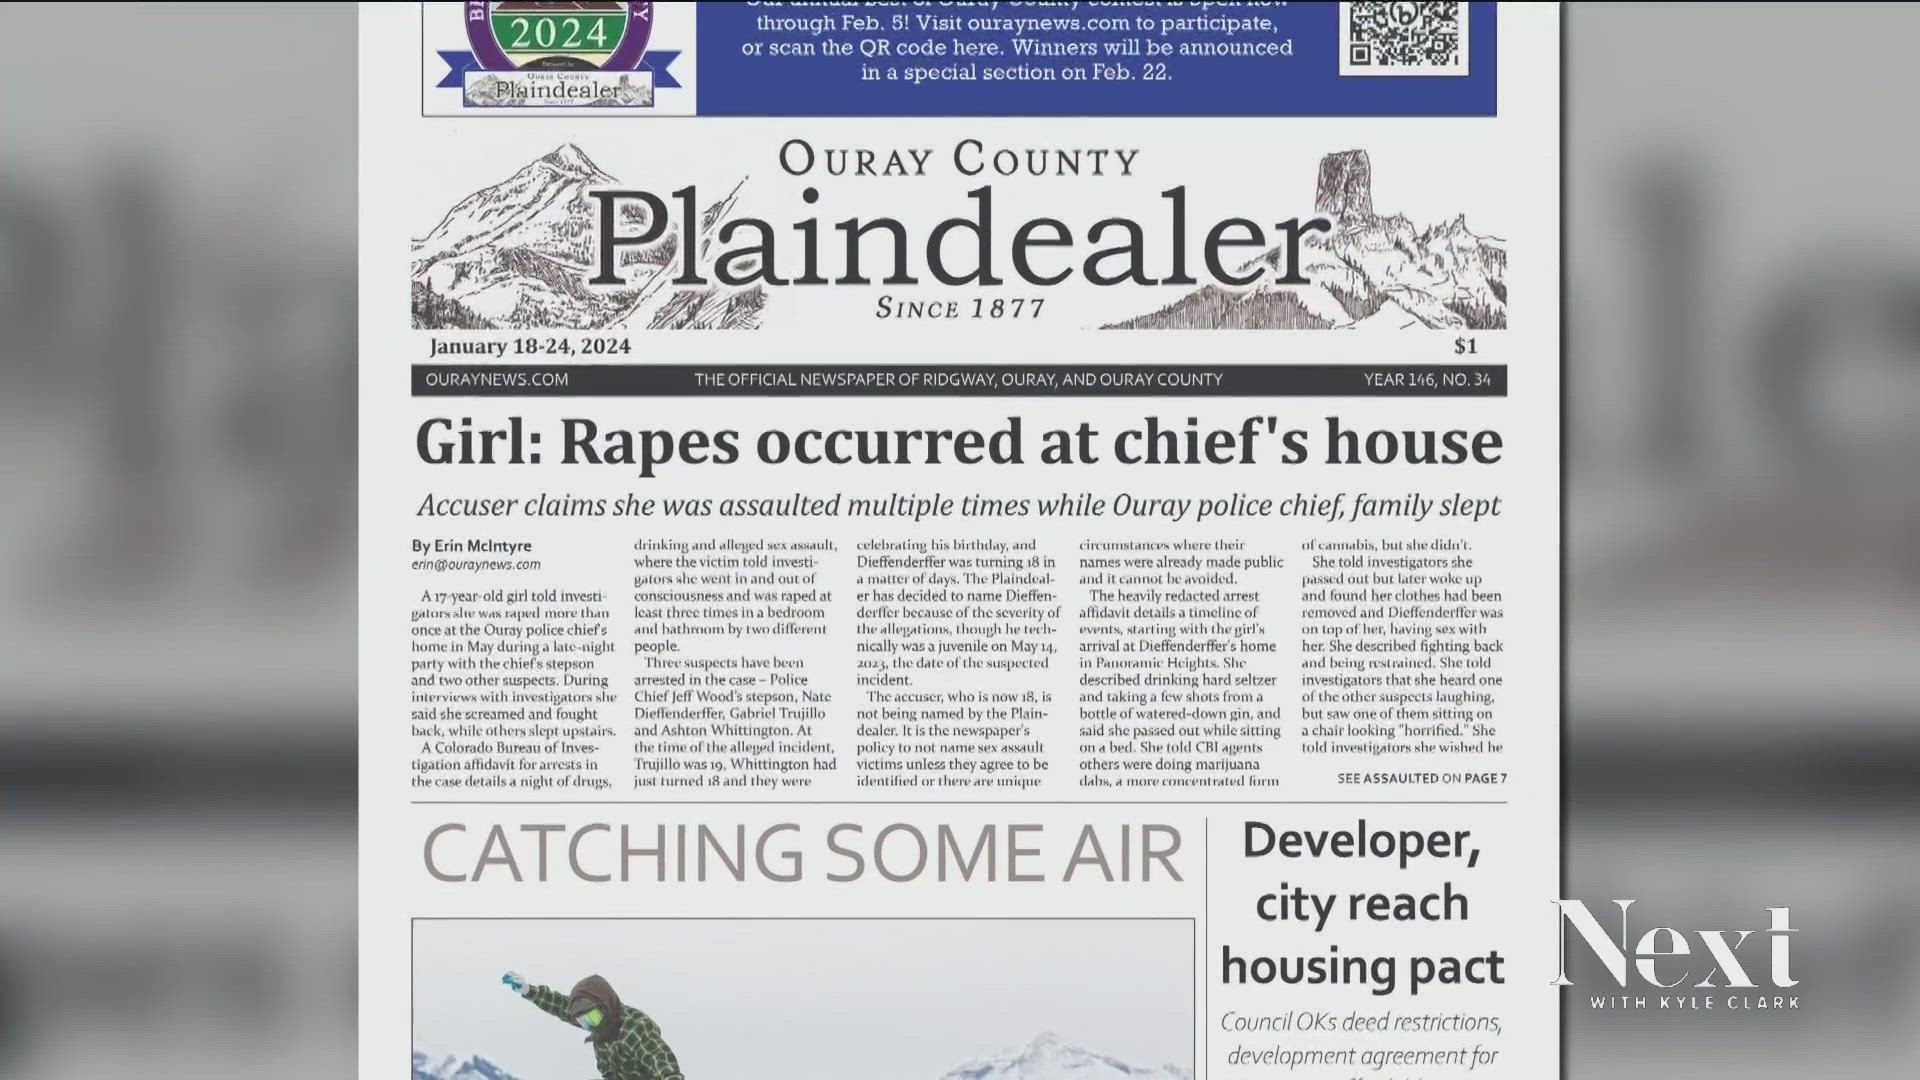 Whoever stole nearly all the copies of the Ouray newspaper - with the story about the police chief's son, returned the copies and was cited by police.